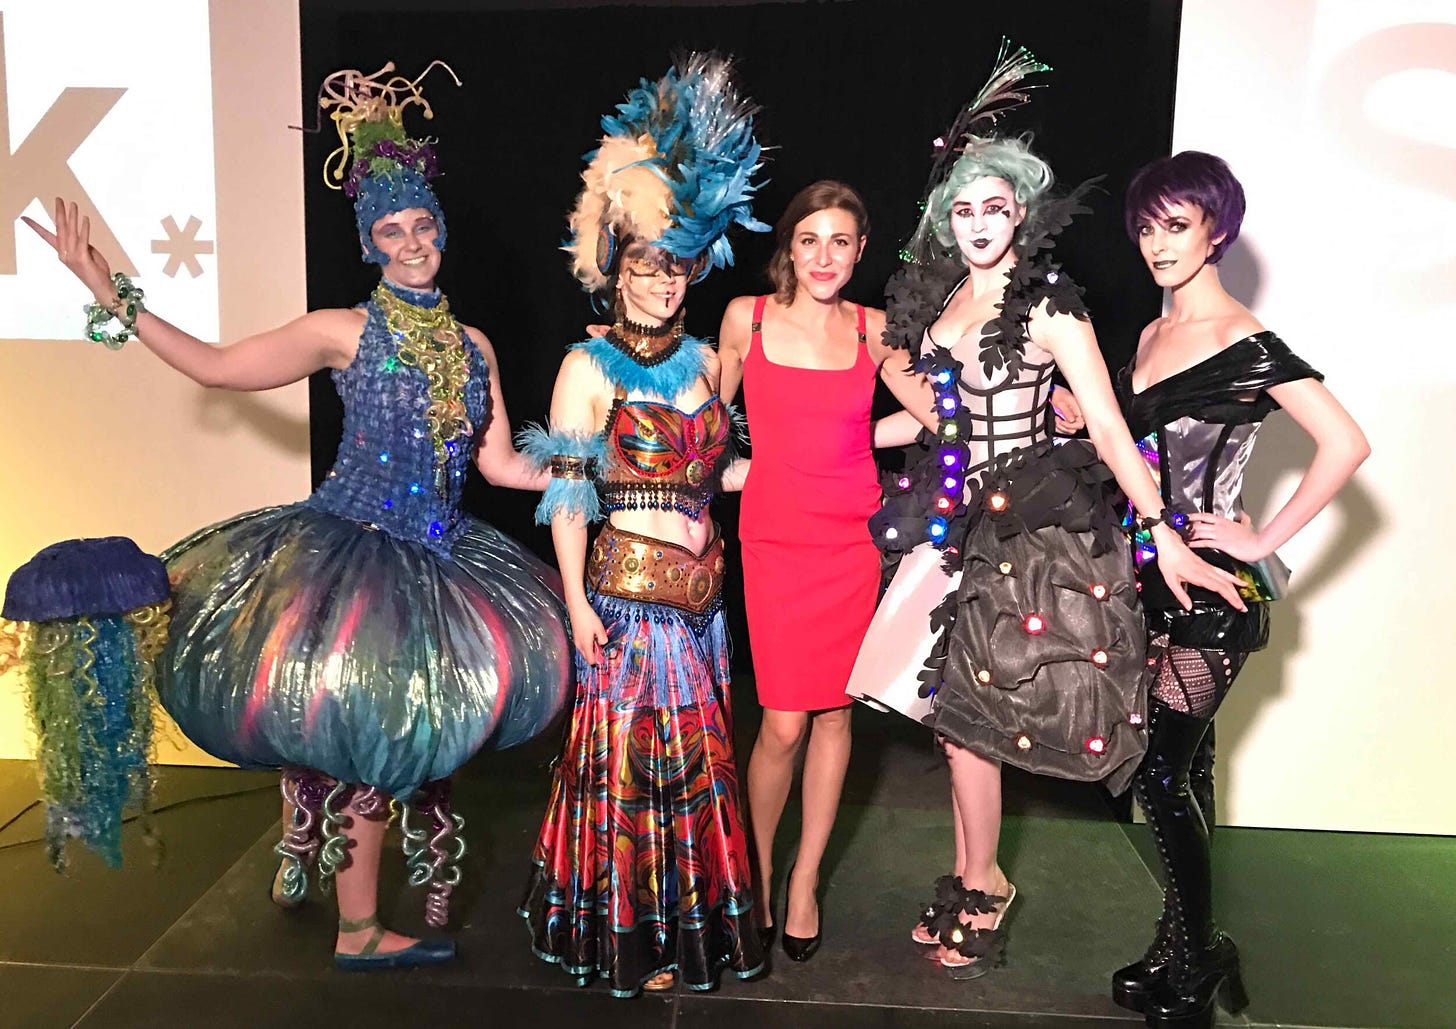 Amanda Cosco posing with four models in costume from MakeFashion 